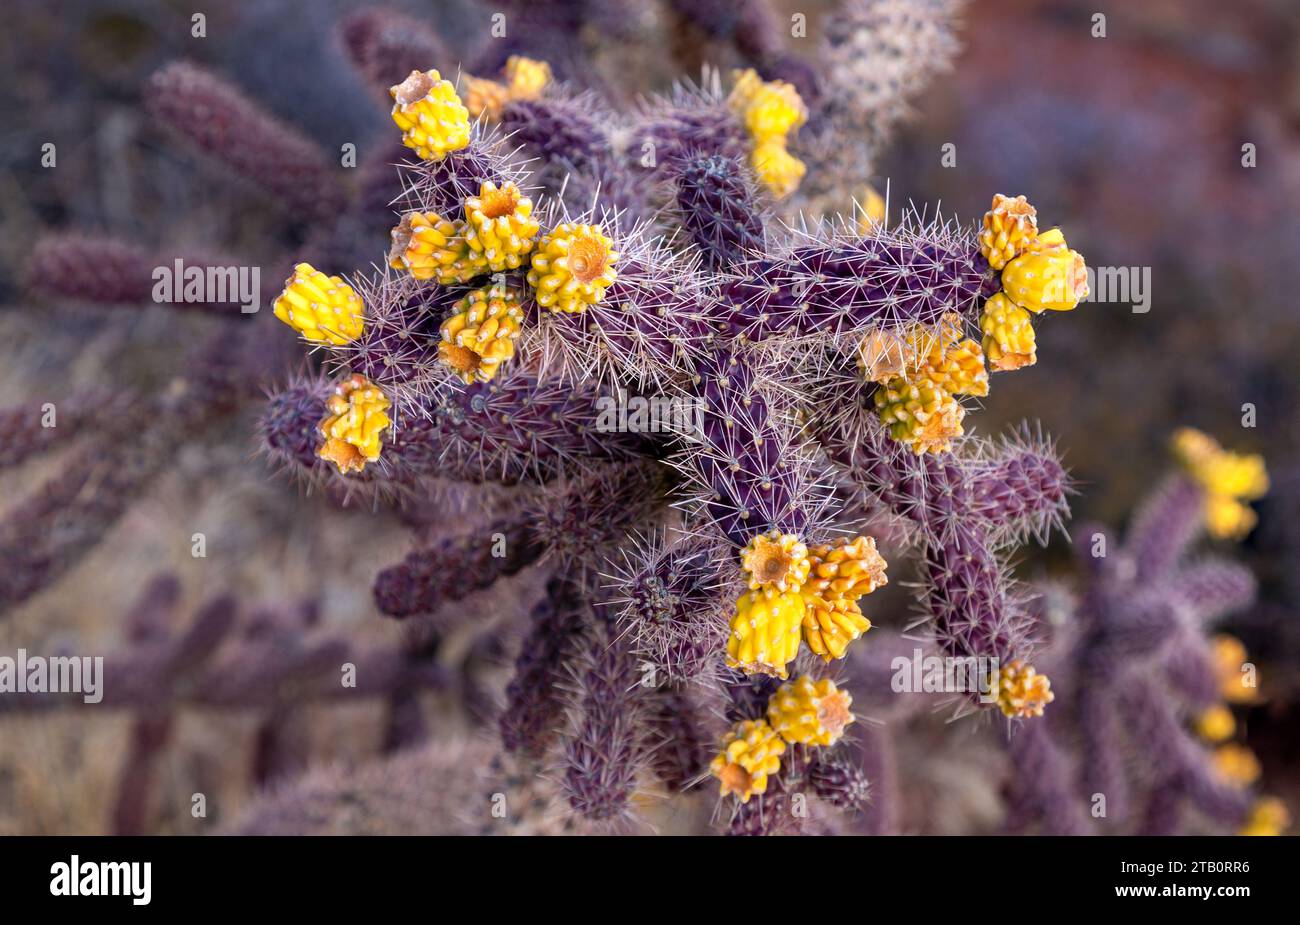 Cane Cholla or Cylindropuntia Spinosior, North American Southwest US Desert Cactus Species Bloom with Yellow Flowers and Purple Stem Close Up Detail Stock Photo